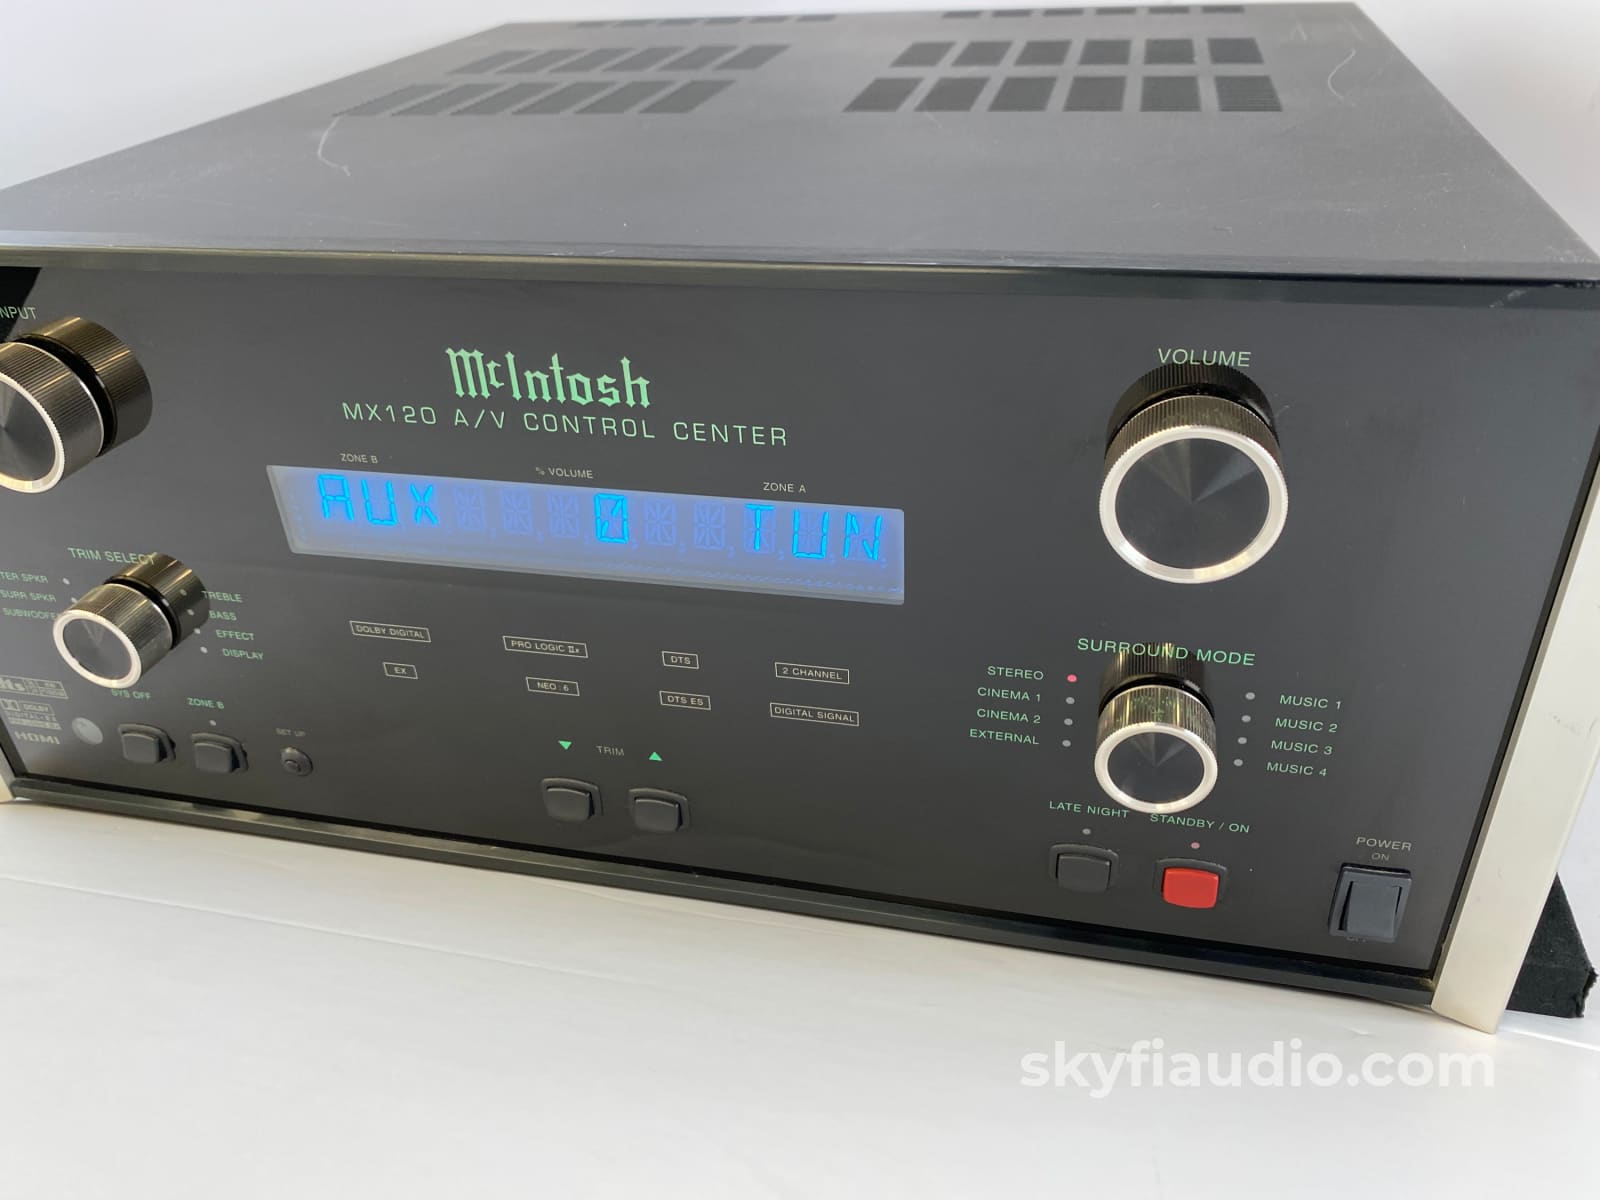 Mcintosh Mx120 Home Theater Processor W/Dolby Digital Dts-Hd Plus Phono Input Preamplifier